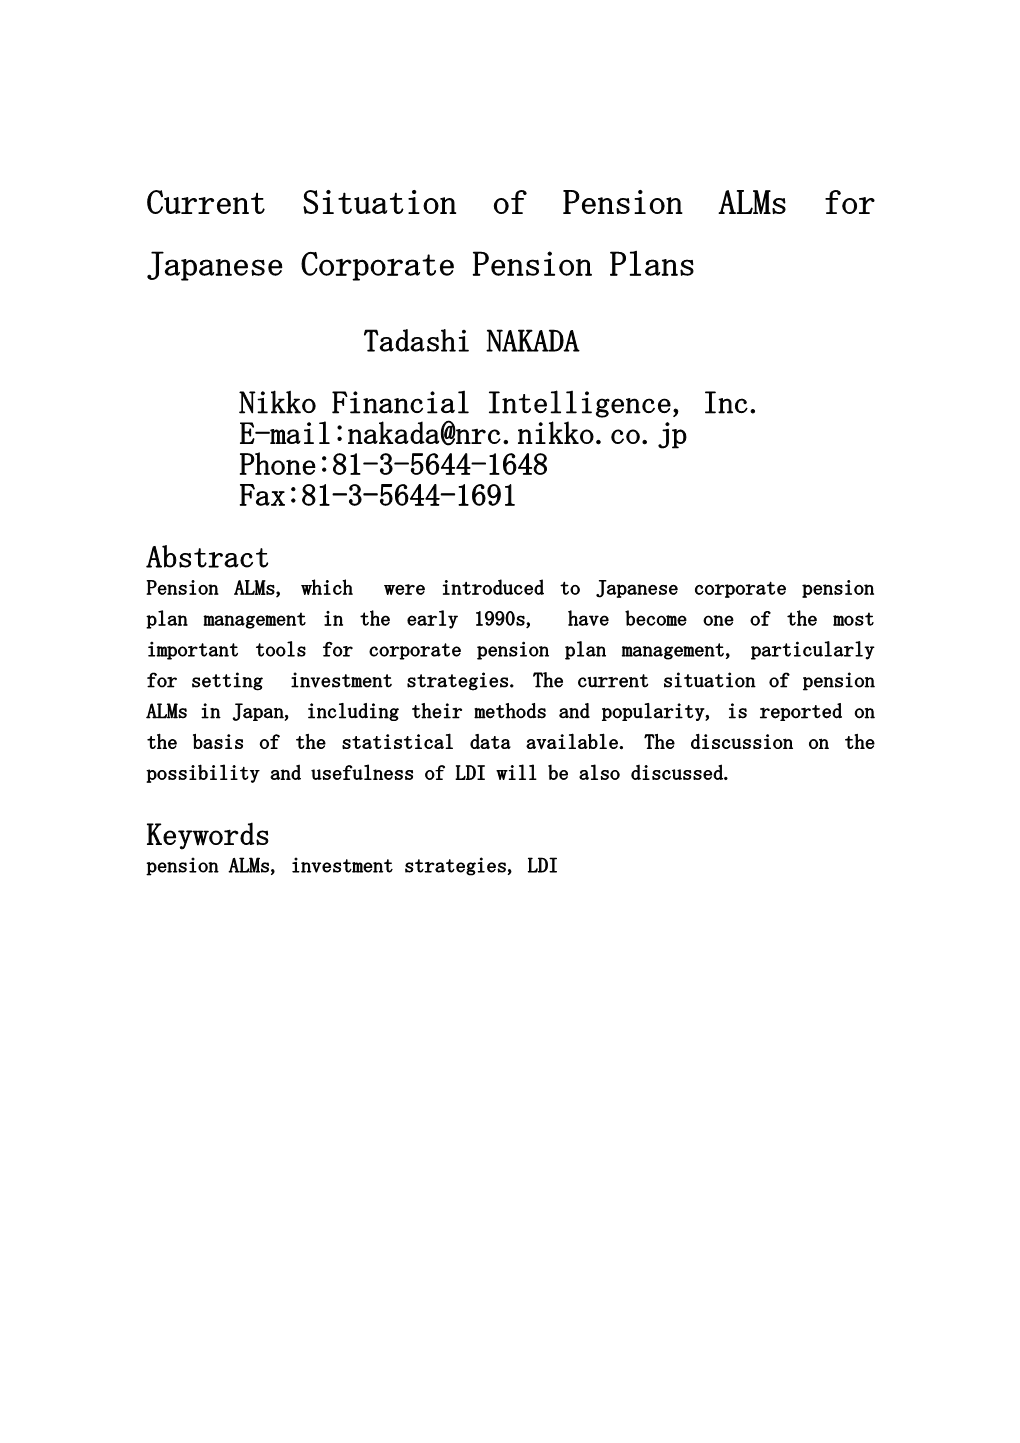 Current Situation of Pension Alms in Japan